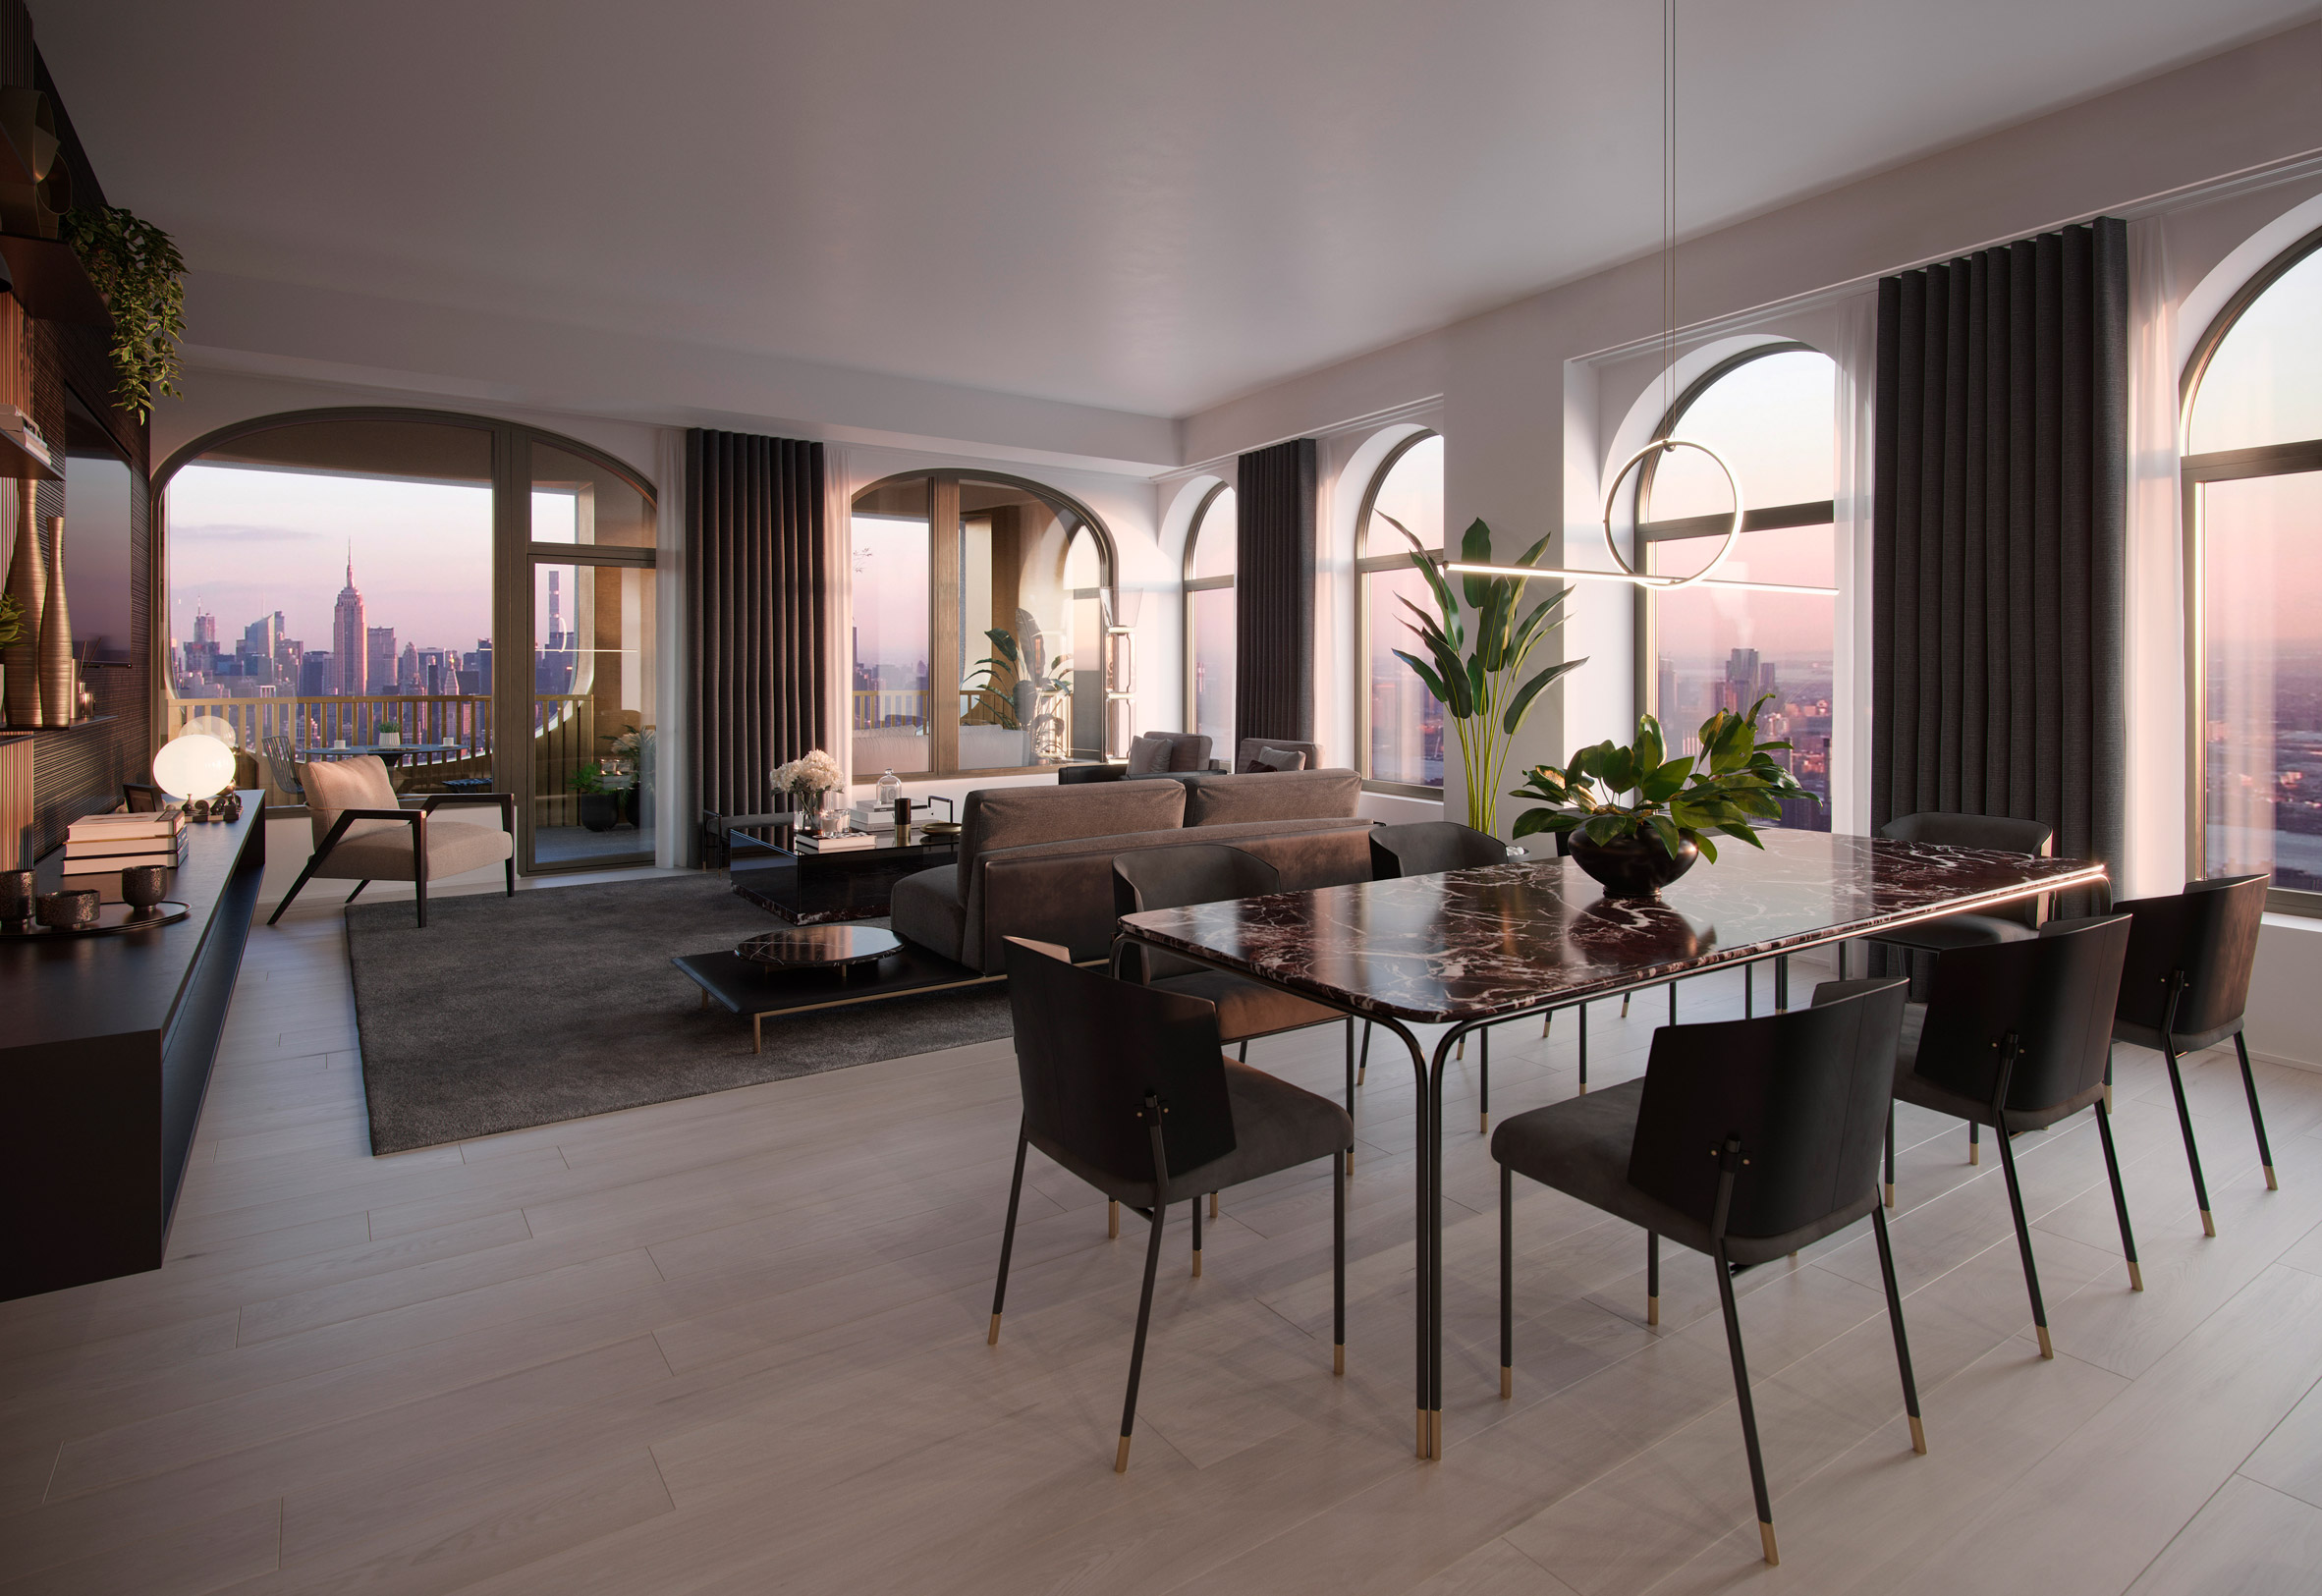 Living room and kitchen in Aston Martin Residences by David Adjaye and Aston Martin